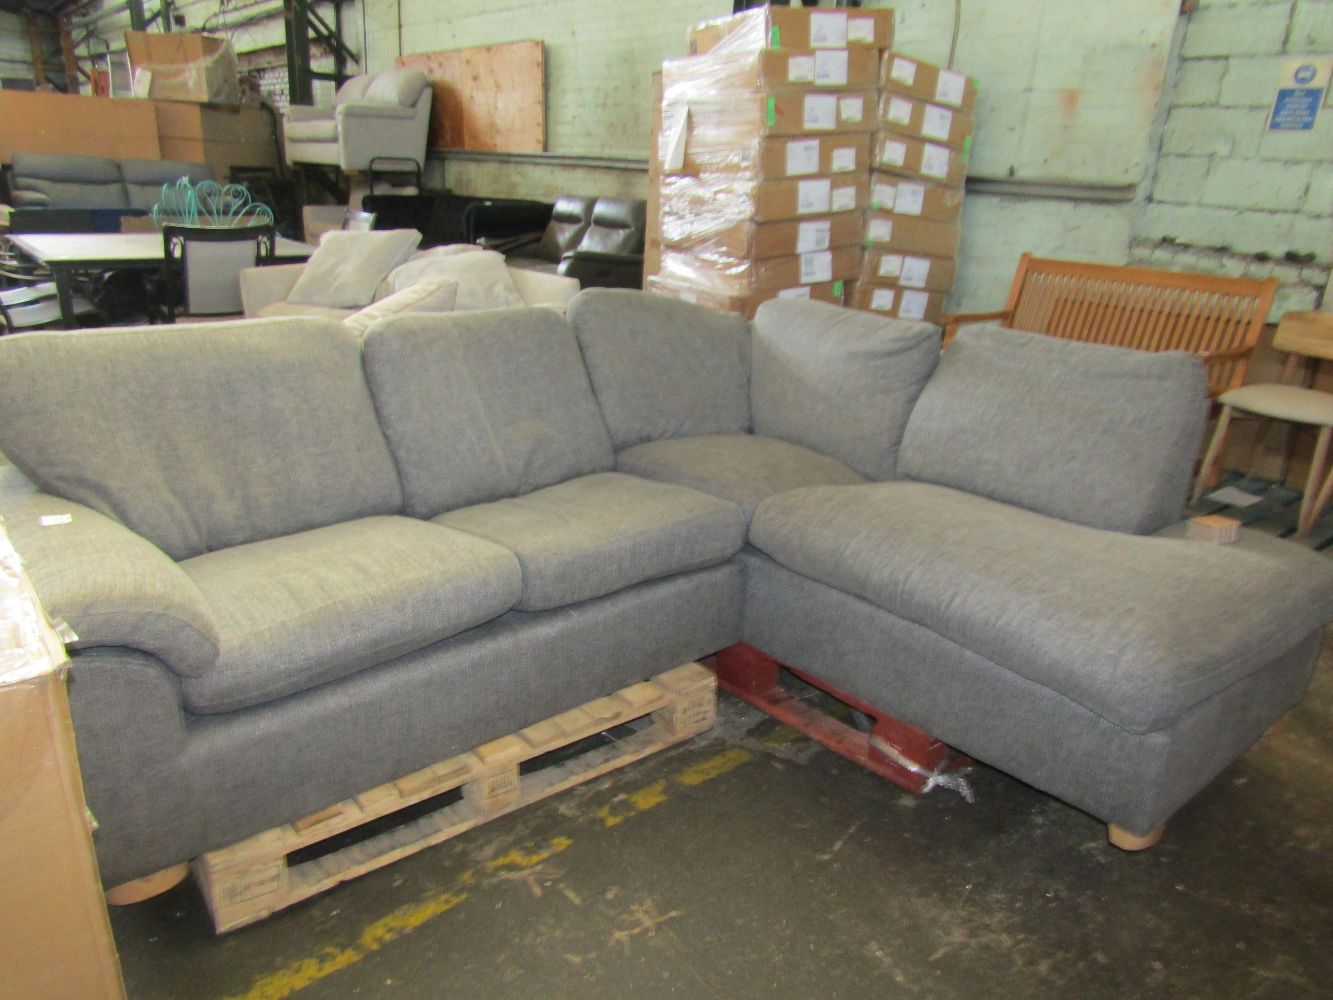 Sofas & Chairs from Costco, Dunelm, Oak Furnitureland and more